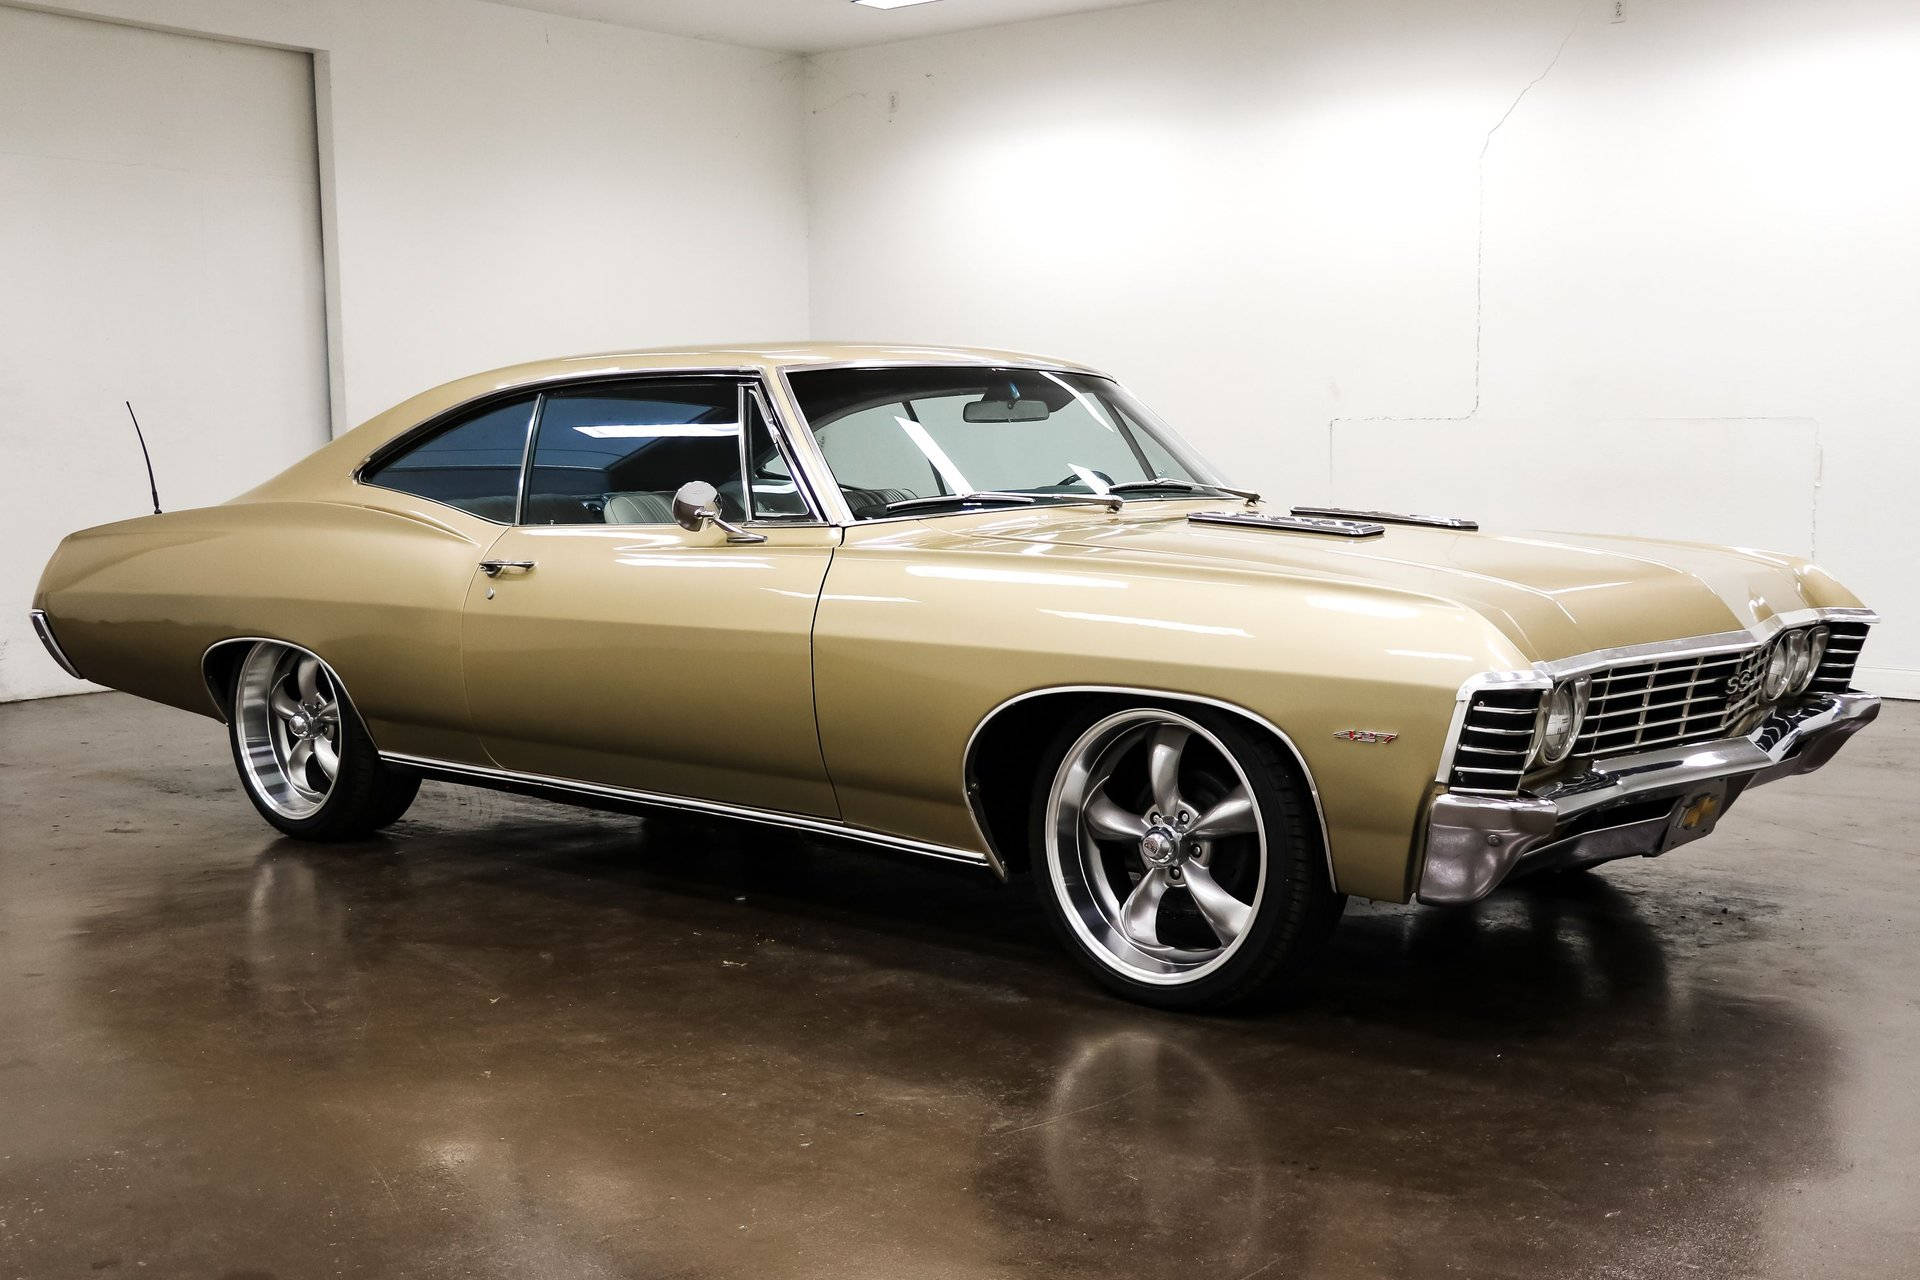 Download Gold Coupe Chevrolet Impala 1967 Wallpaper 